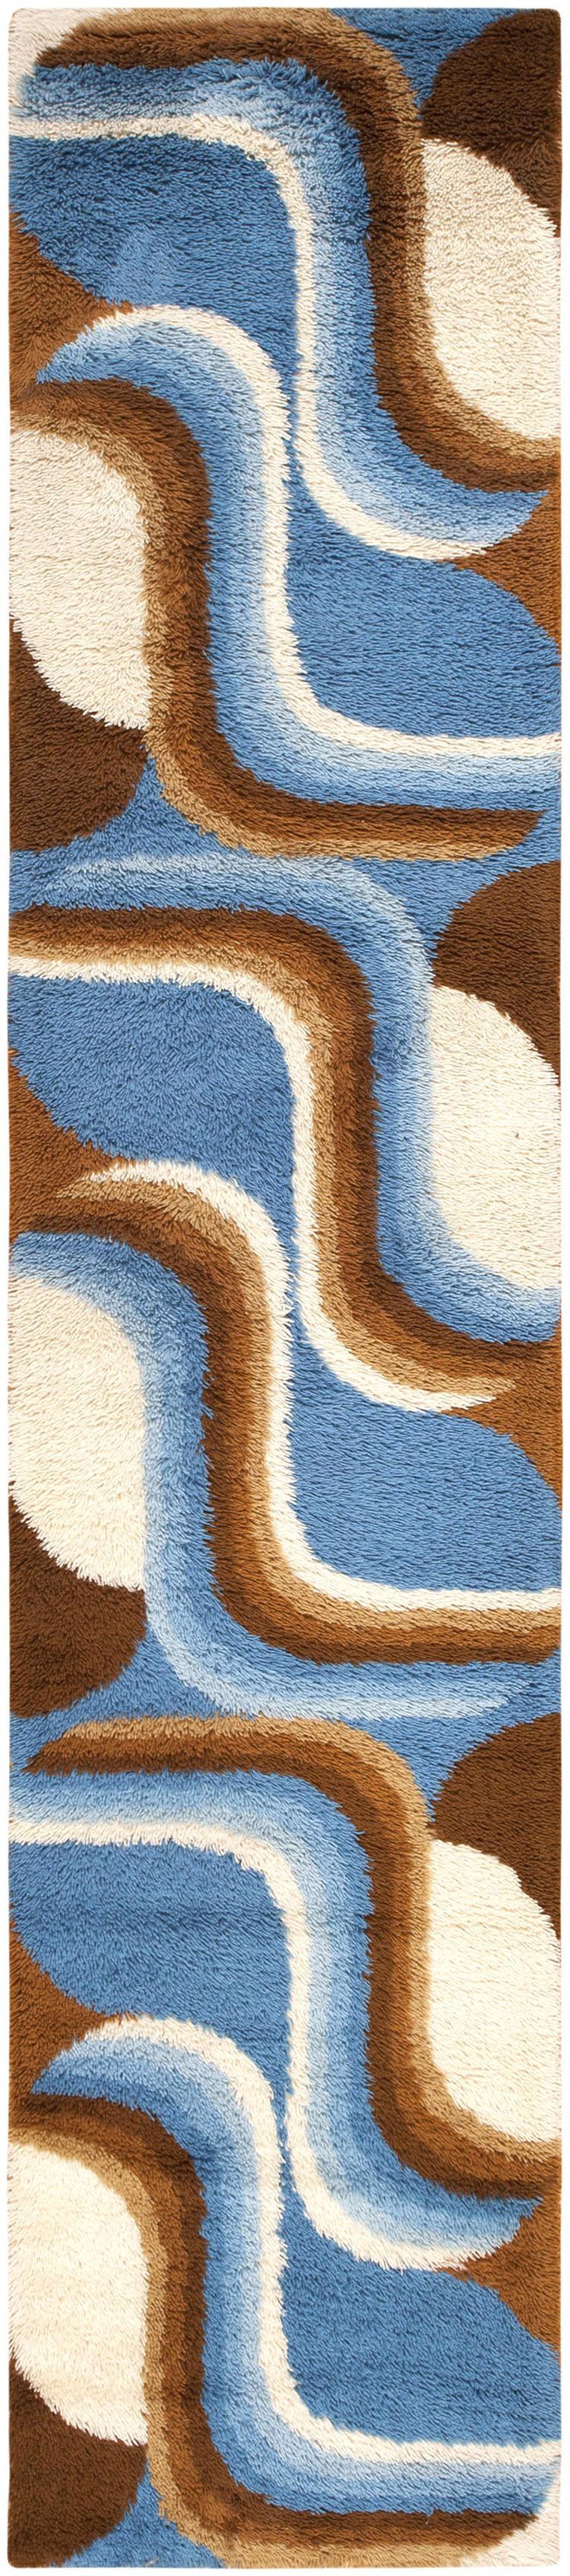 Swedish rug, Scandinavia, mid-20th century, this mod Mid-Century Swedish deco rug epitomizes the pop-art style. The wildly decorated field displays streamlined polychrome waves set on a background of abstract monochromatic segments that feature the